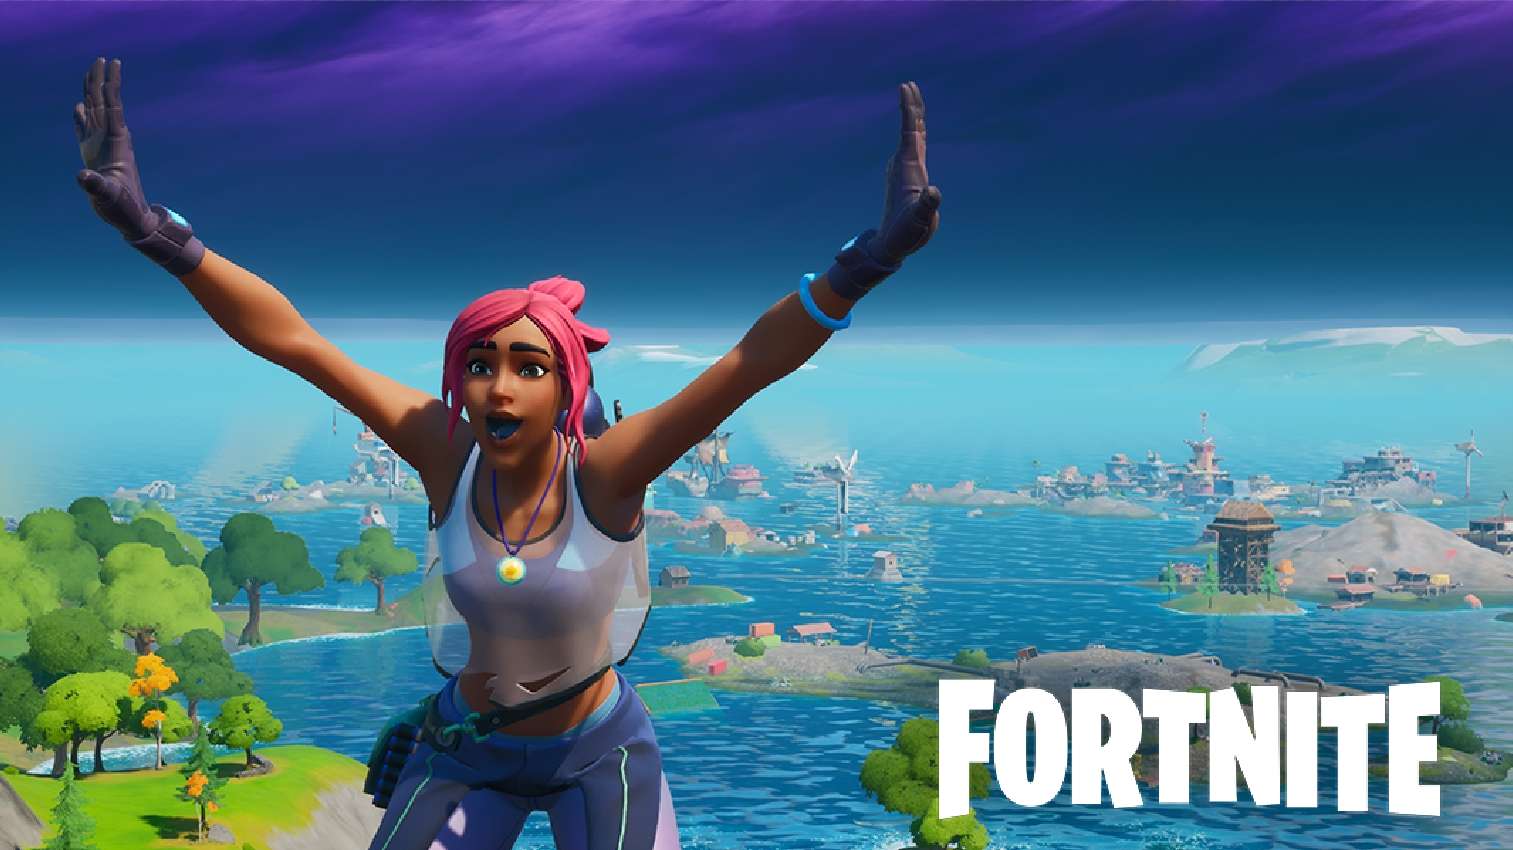 Fortnite character in front of Season 3 map